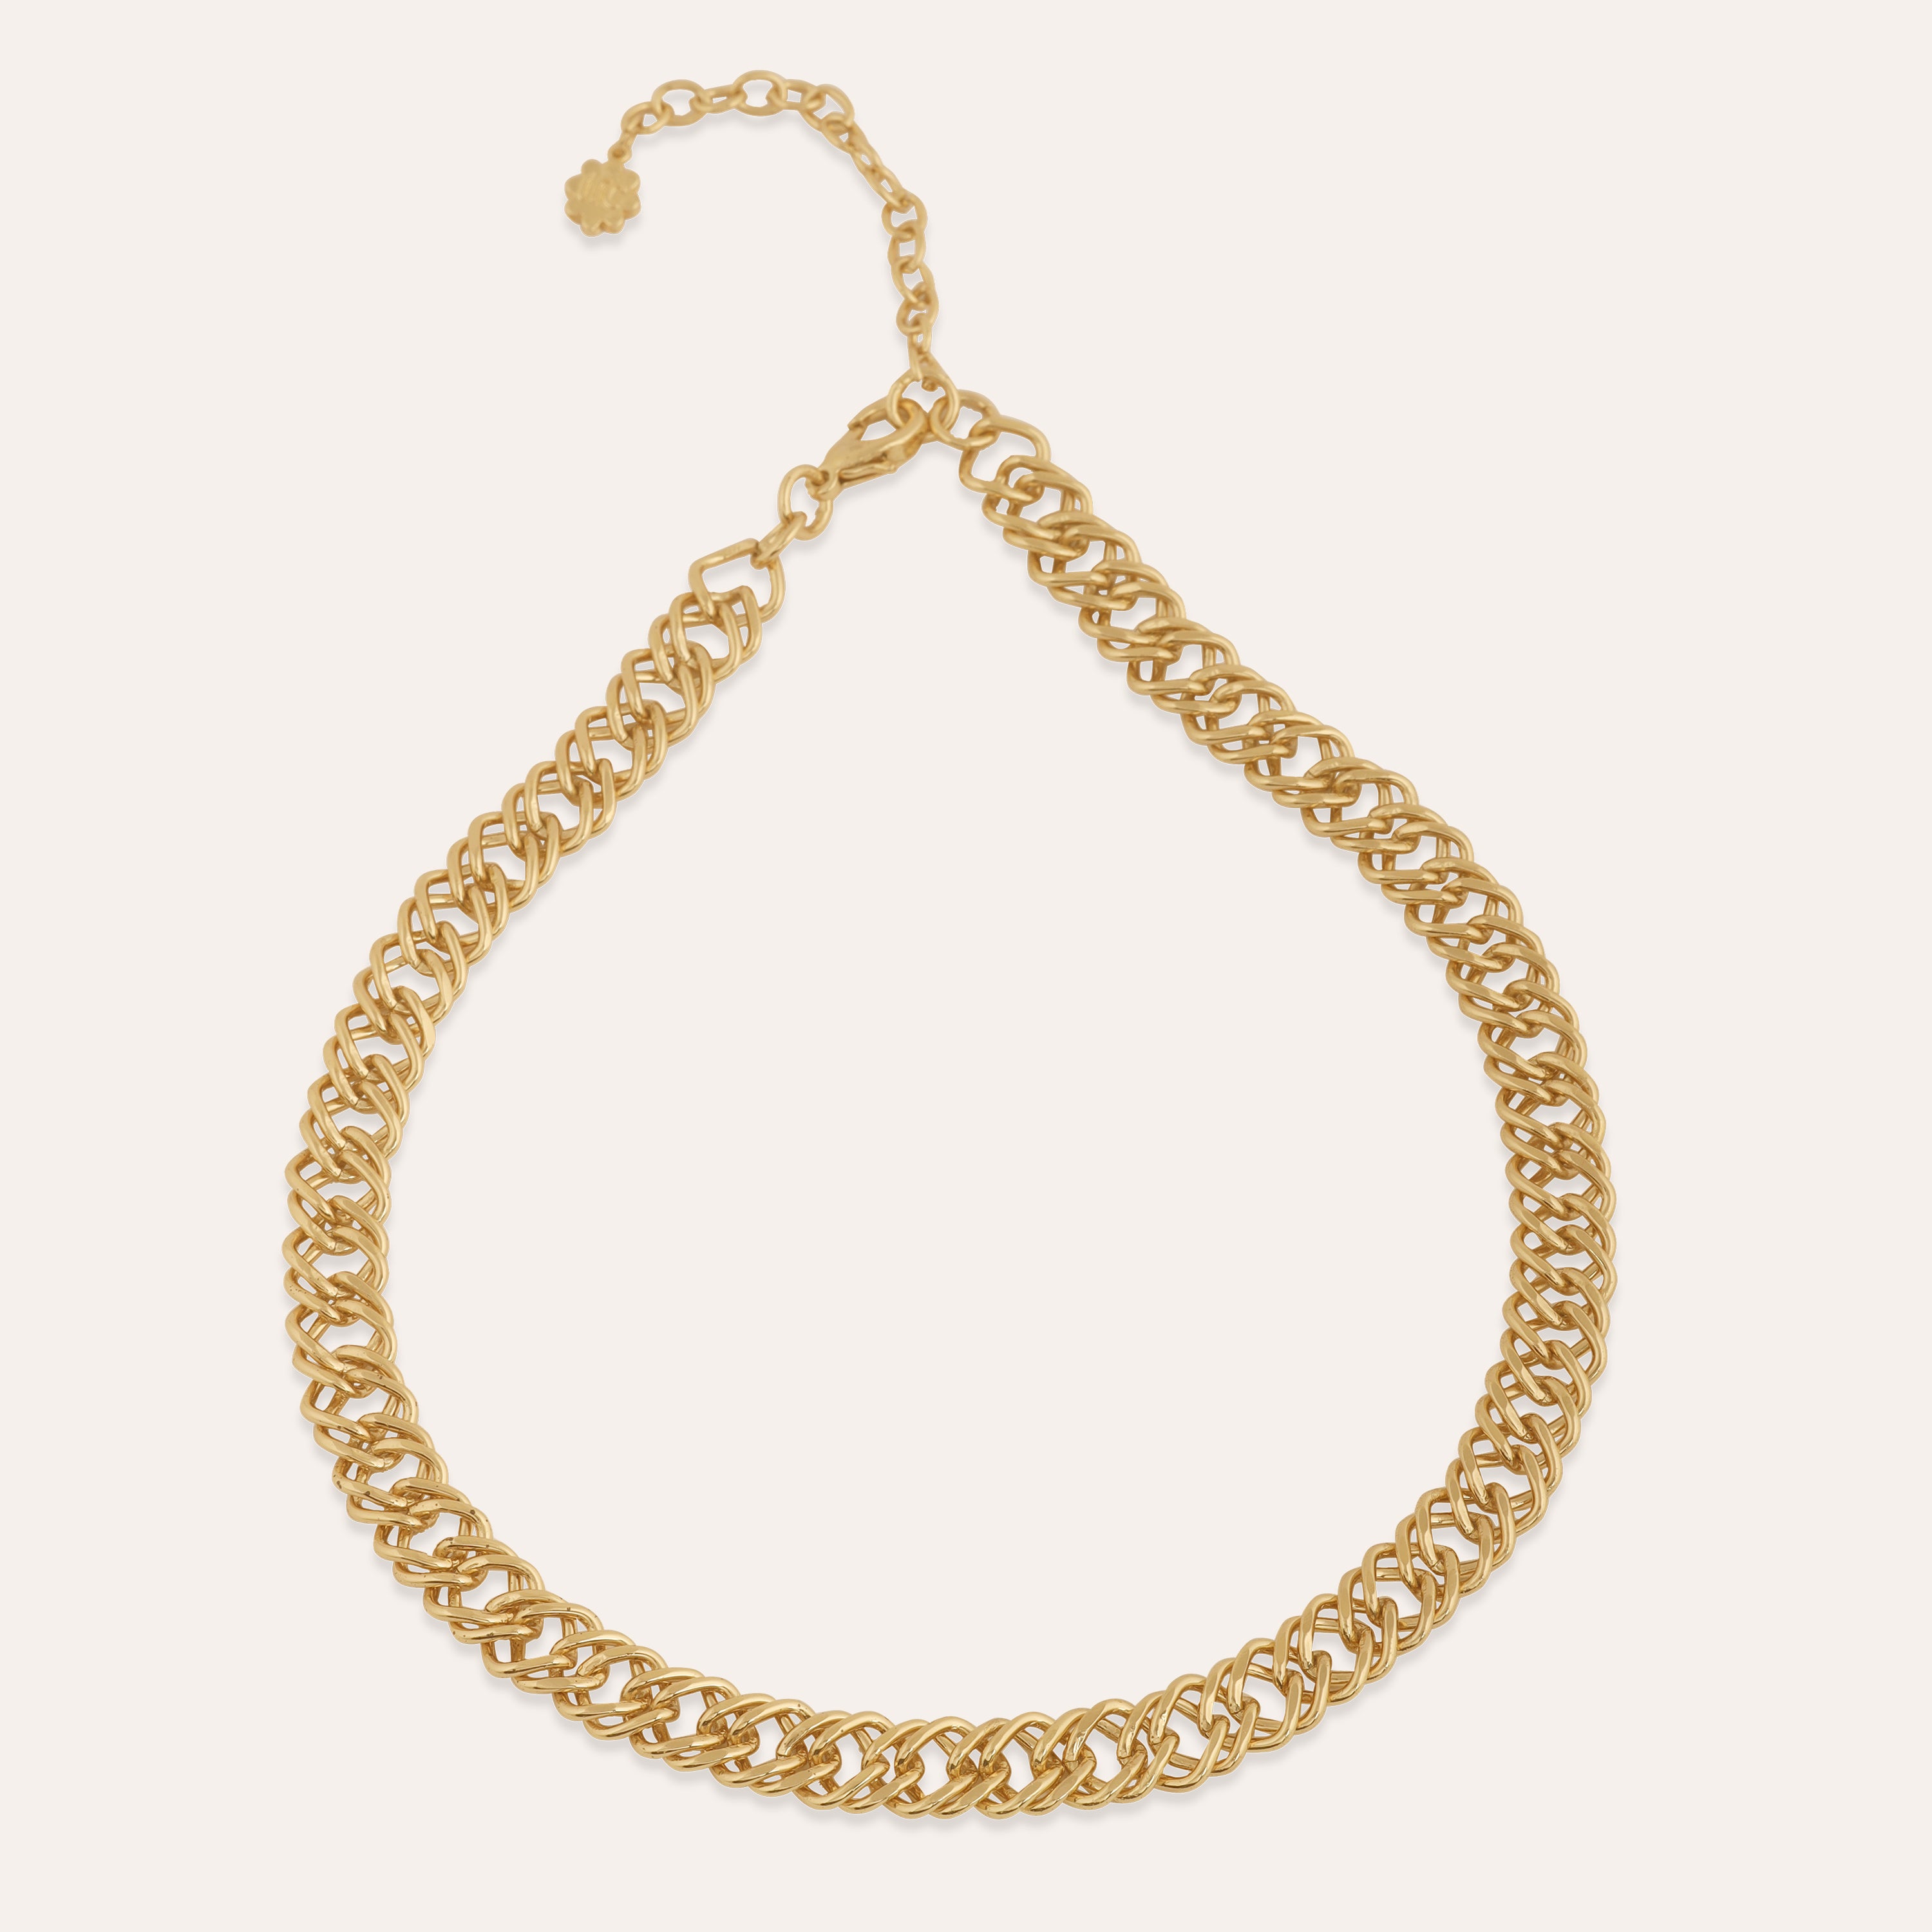 TFC Milano Luxury Gold Plated Chain Necklace-Enhance your elegance with our collection of gold-plated necklaces for women. Choose from stunning pendant necklaces, chic choker necklaces, and trendy layered necklaces. Our sleek and dainty designs are both affordable and anti-tarnish, ensuring lasting beauty. Enjoy the cheapest fashion jewellery, lightweight and stylish- only at The Fun Company